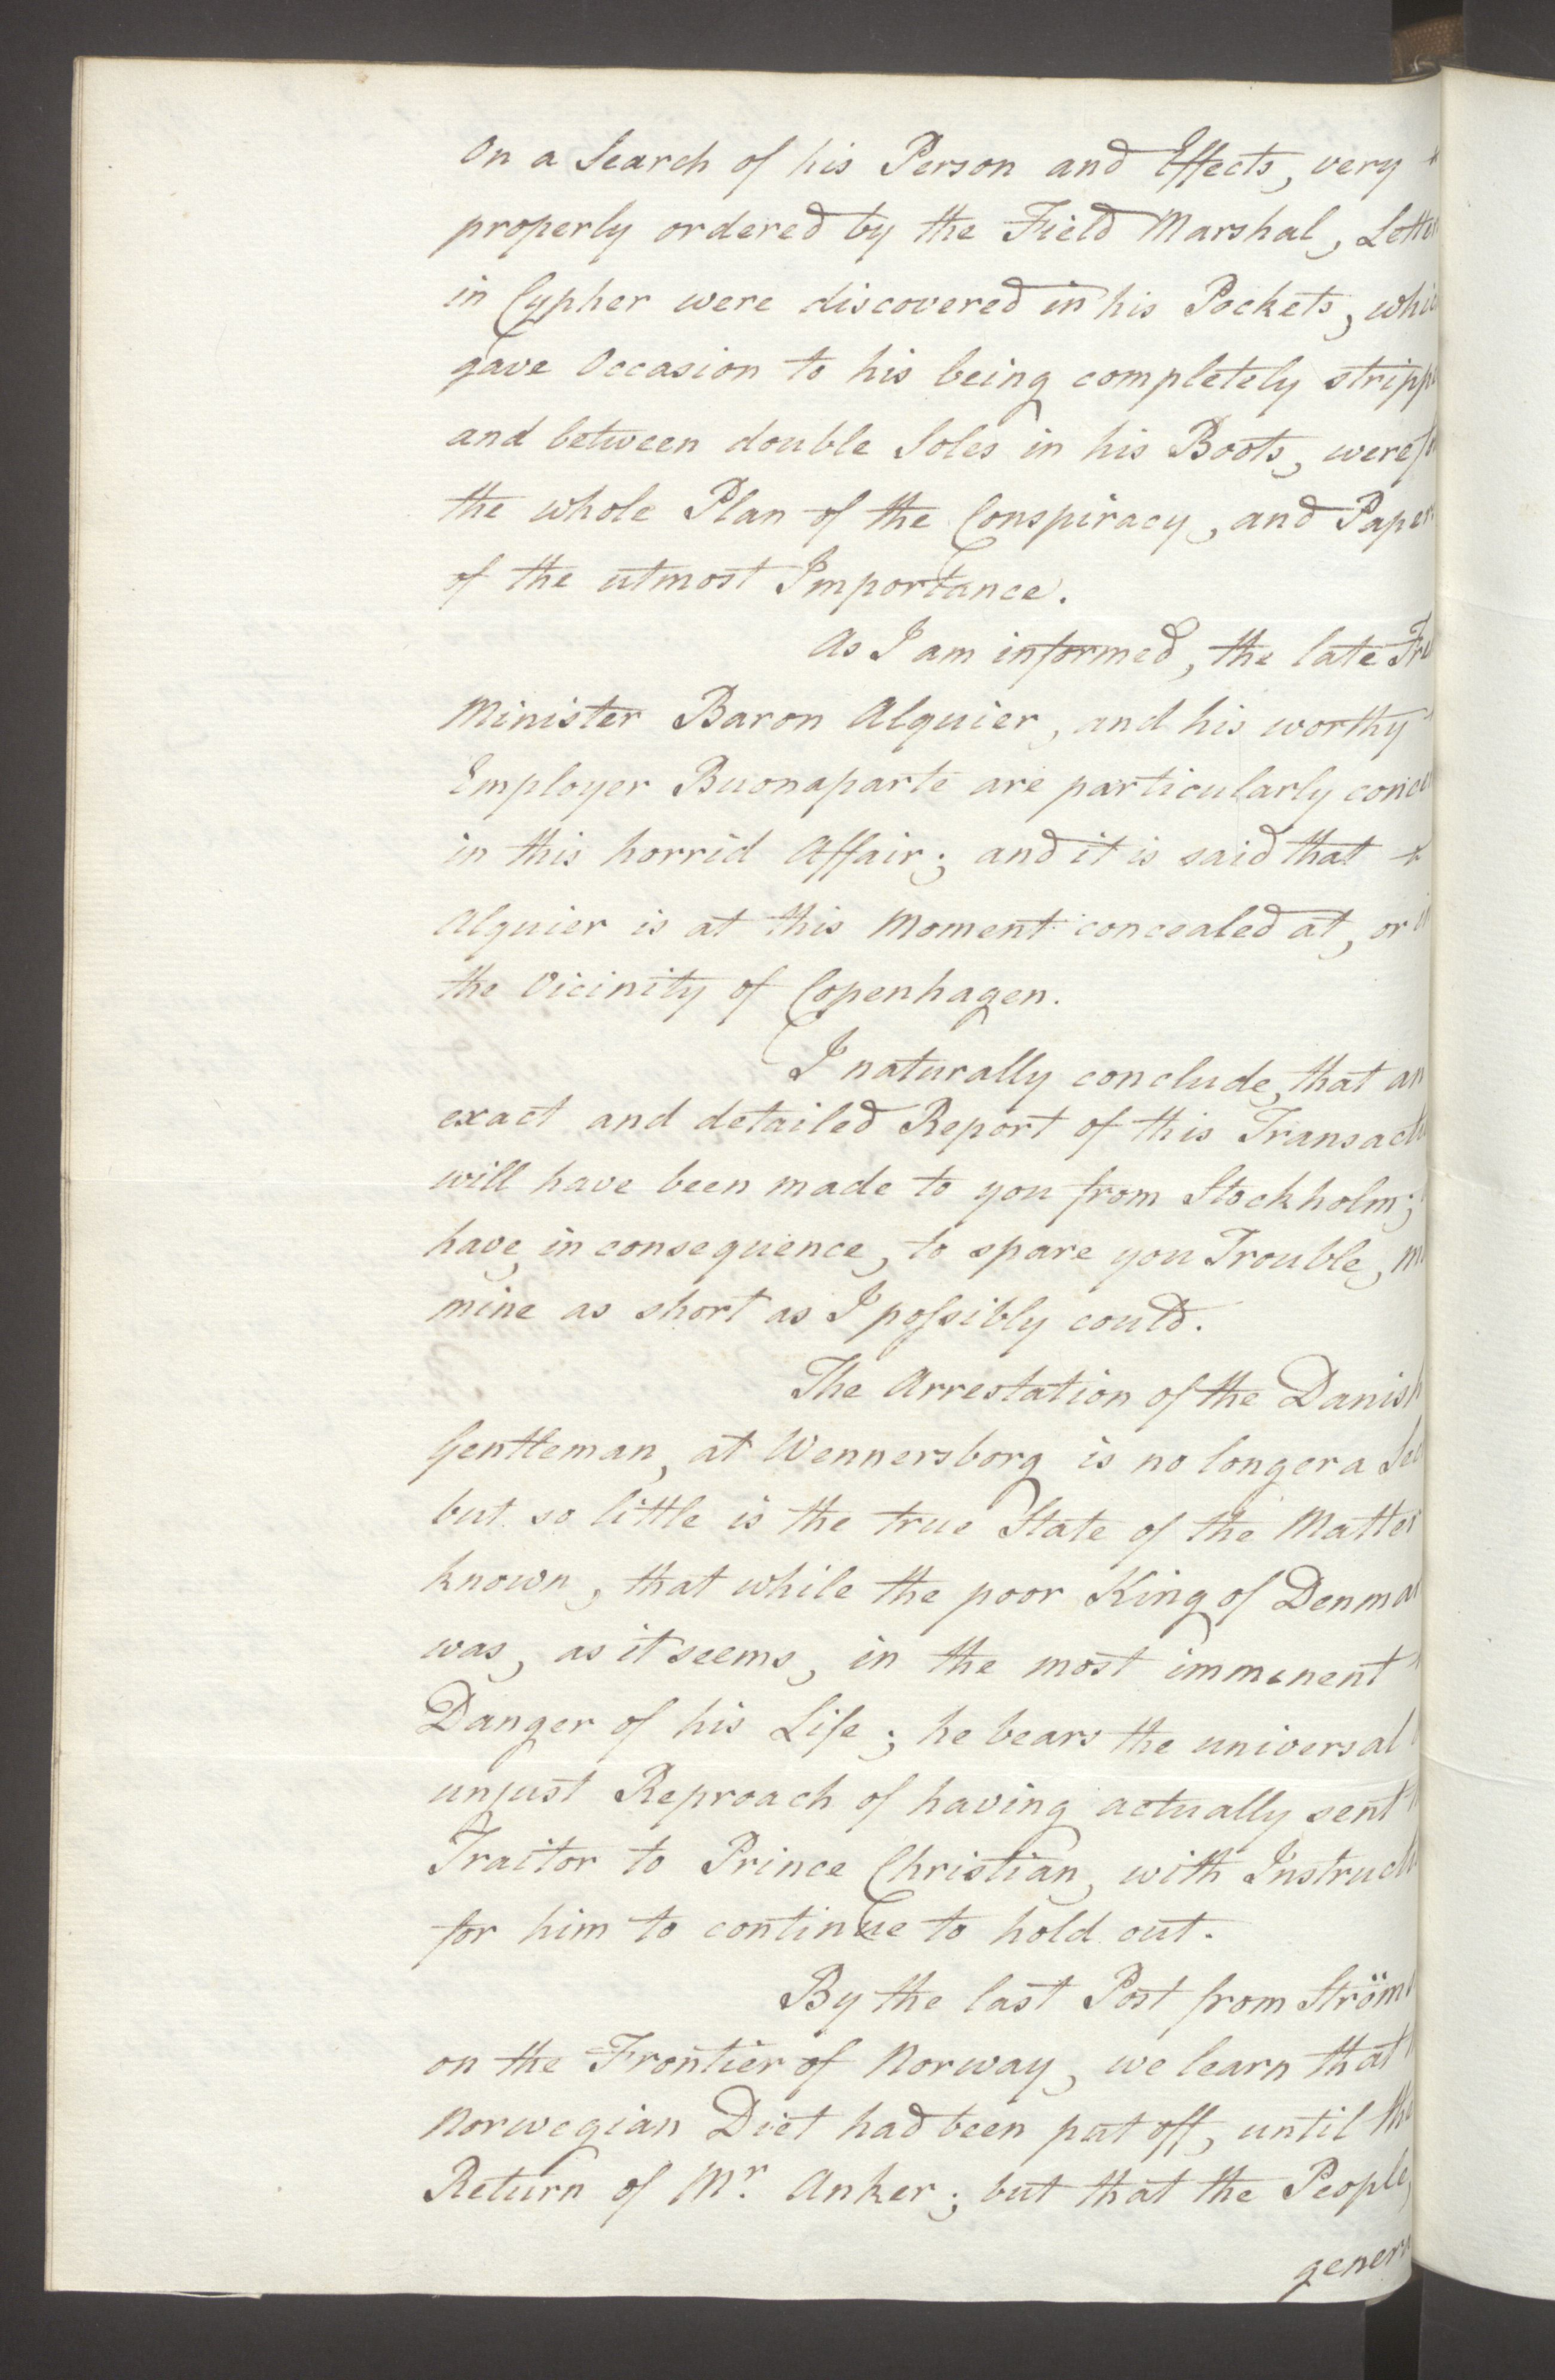 Foreign Office*, UKA/-/FO 38/16: Sir C. Gordon. Reports from Malmö, Jonkoping, and Helsingborg, 1814, p. 35